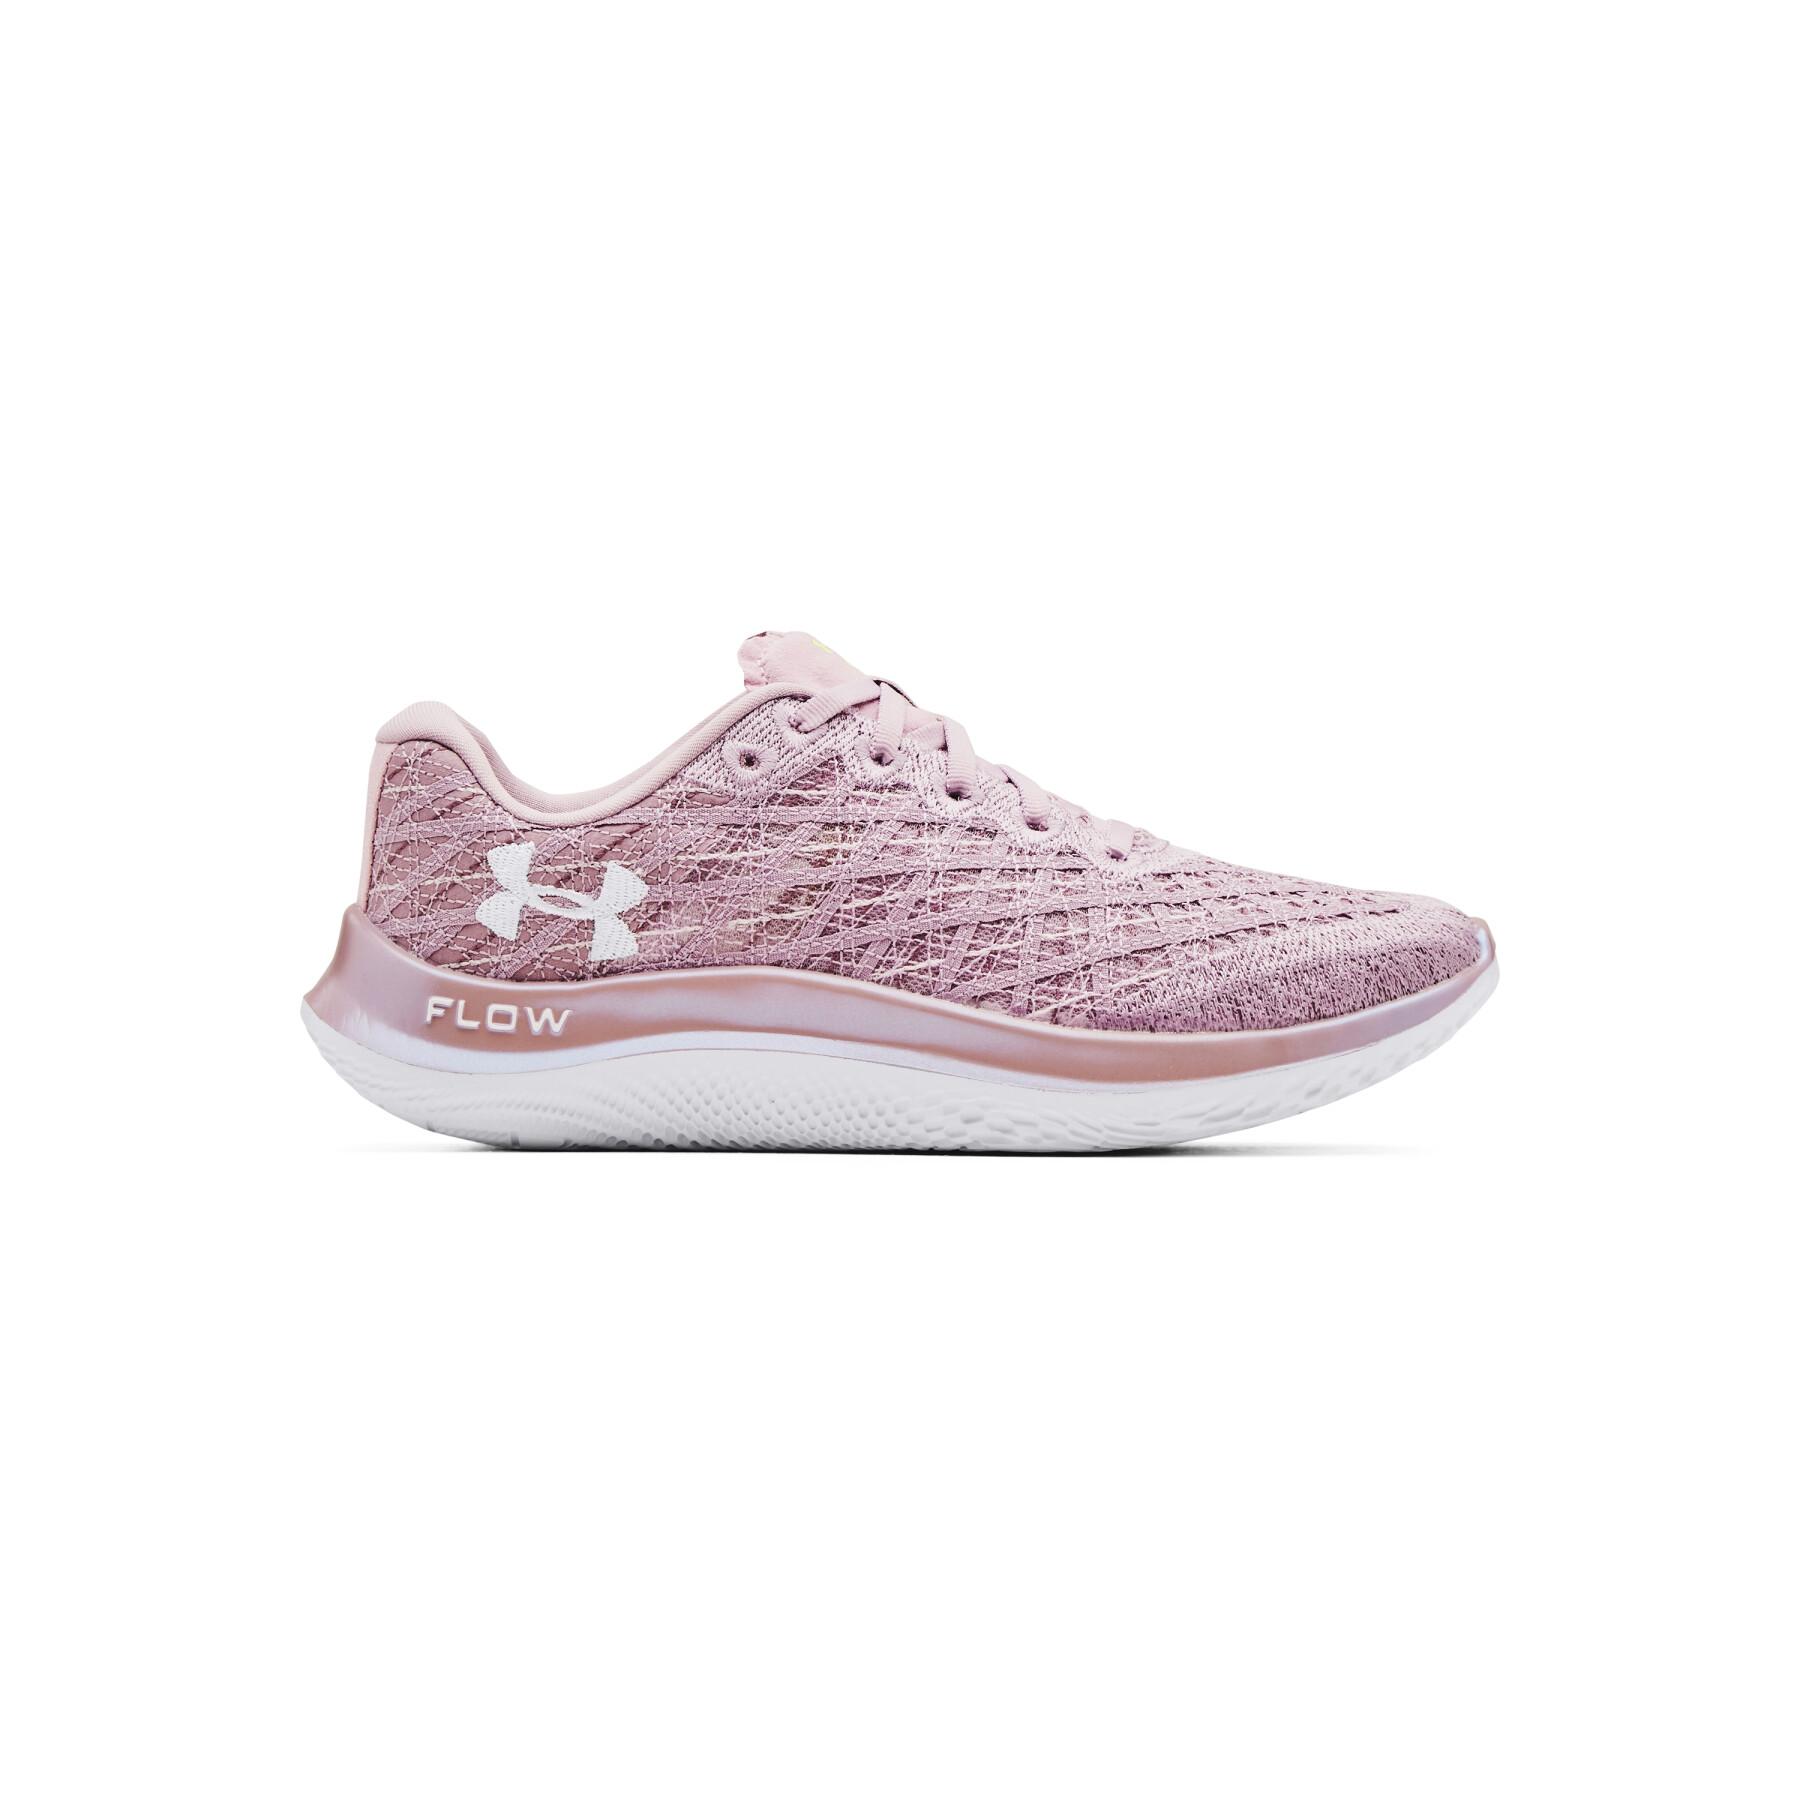 Women's running shoes Under Armour FLOW Velociti Wind